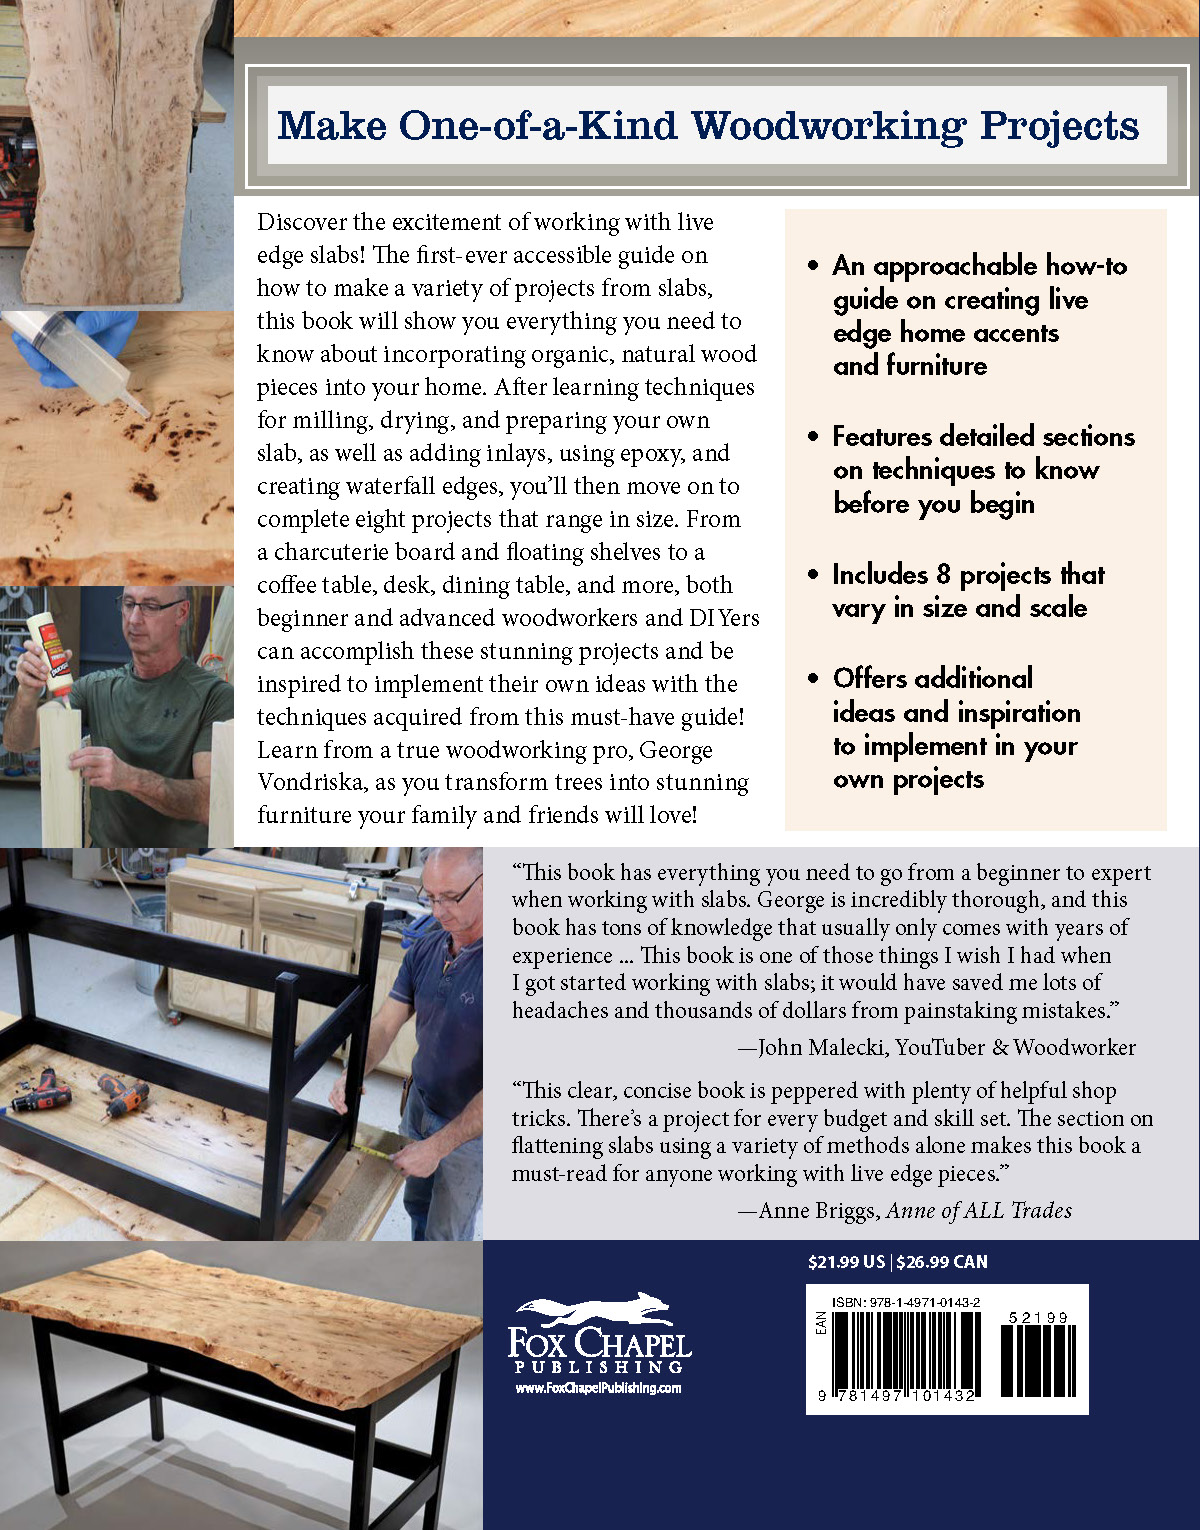 Woodworking Projects back cover